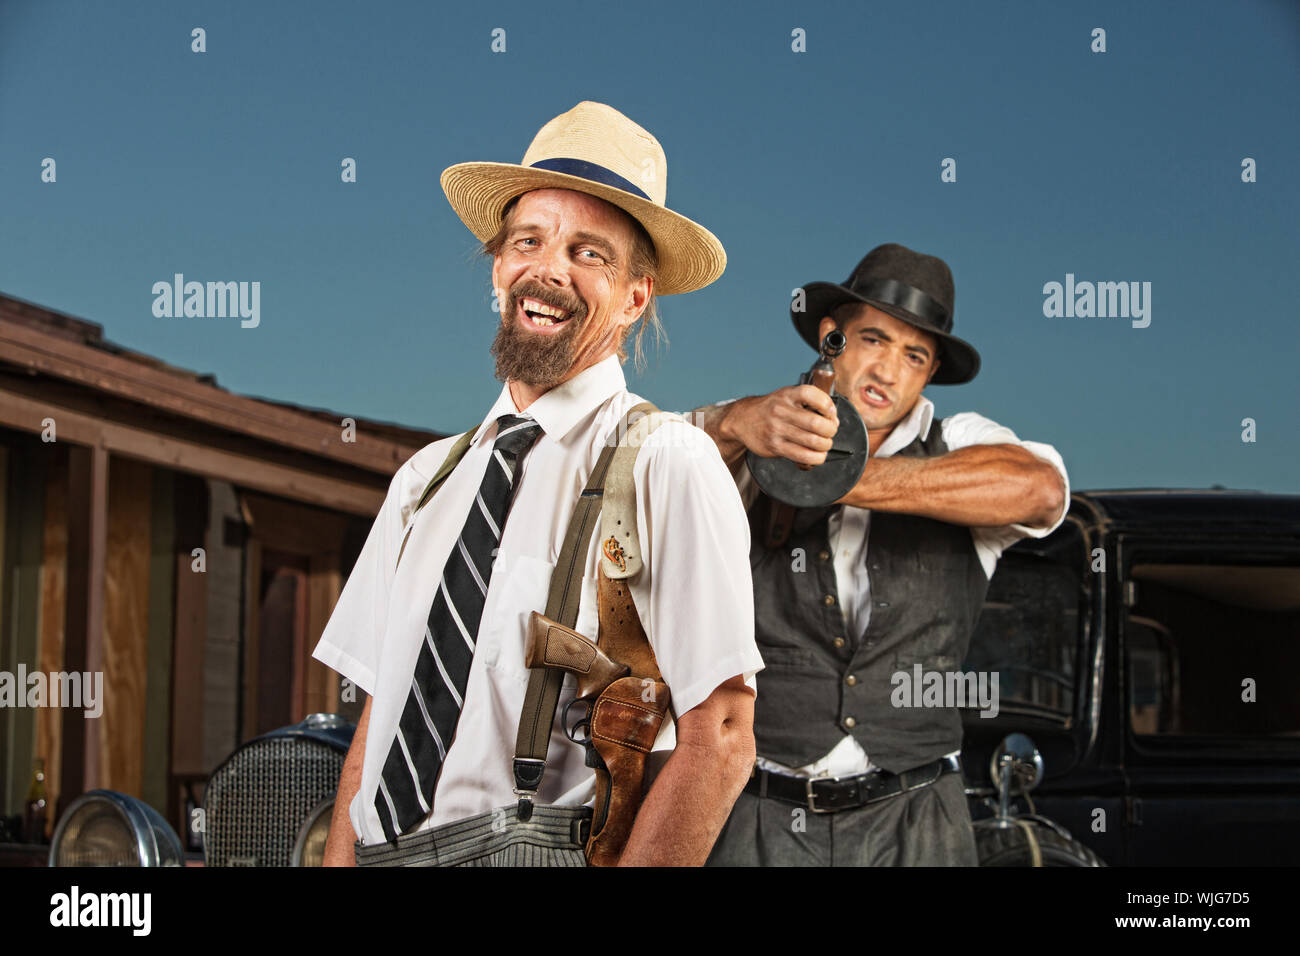 Easygoing vintage mobster with guard aiming gun Stock Photo